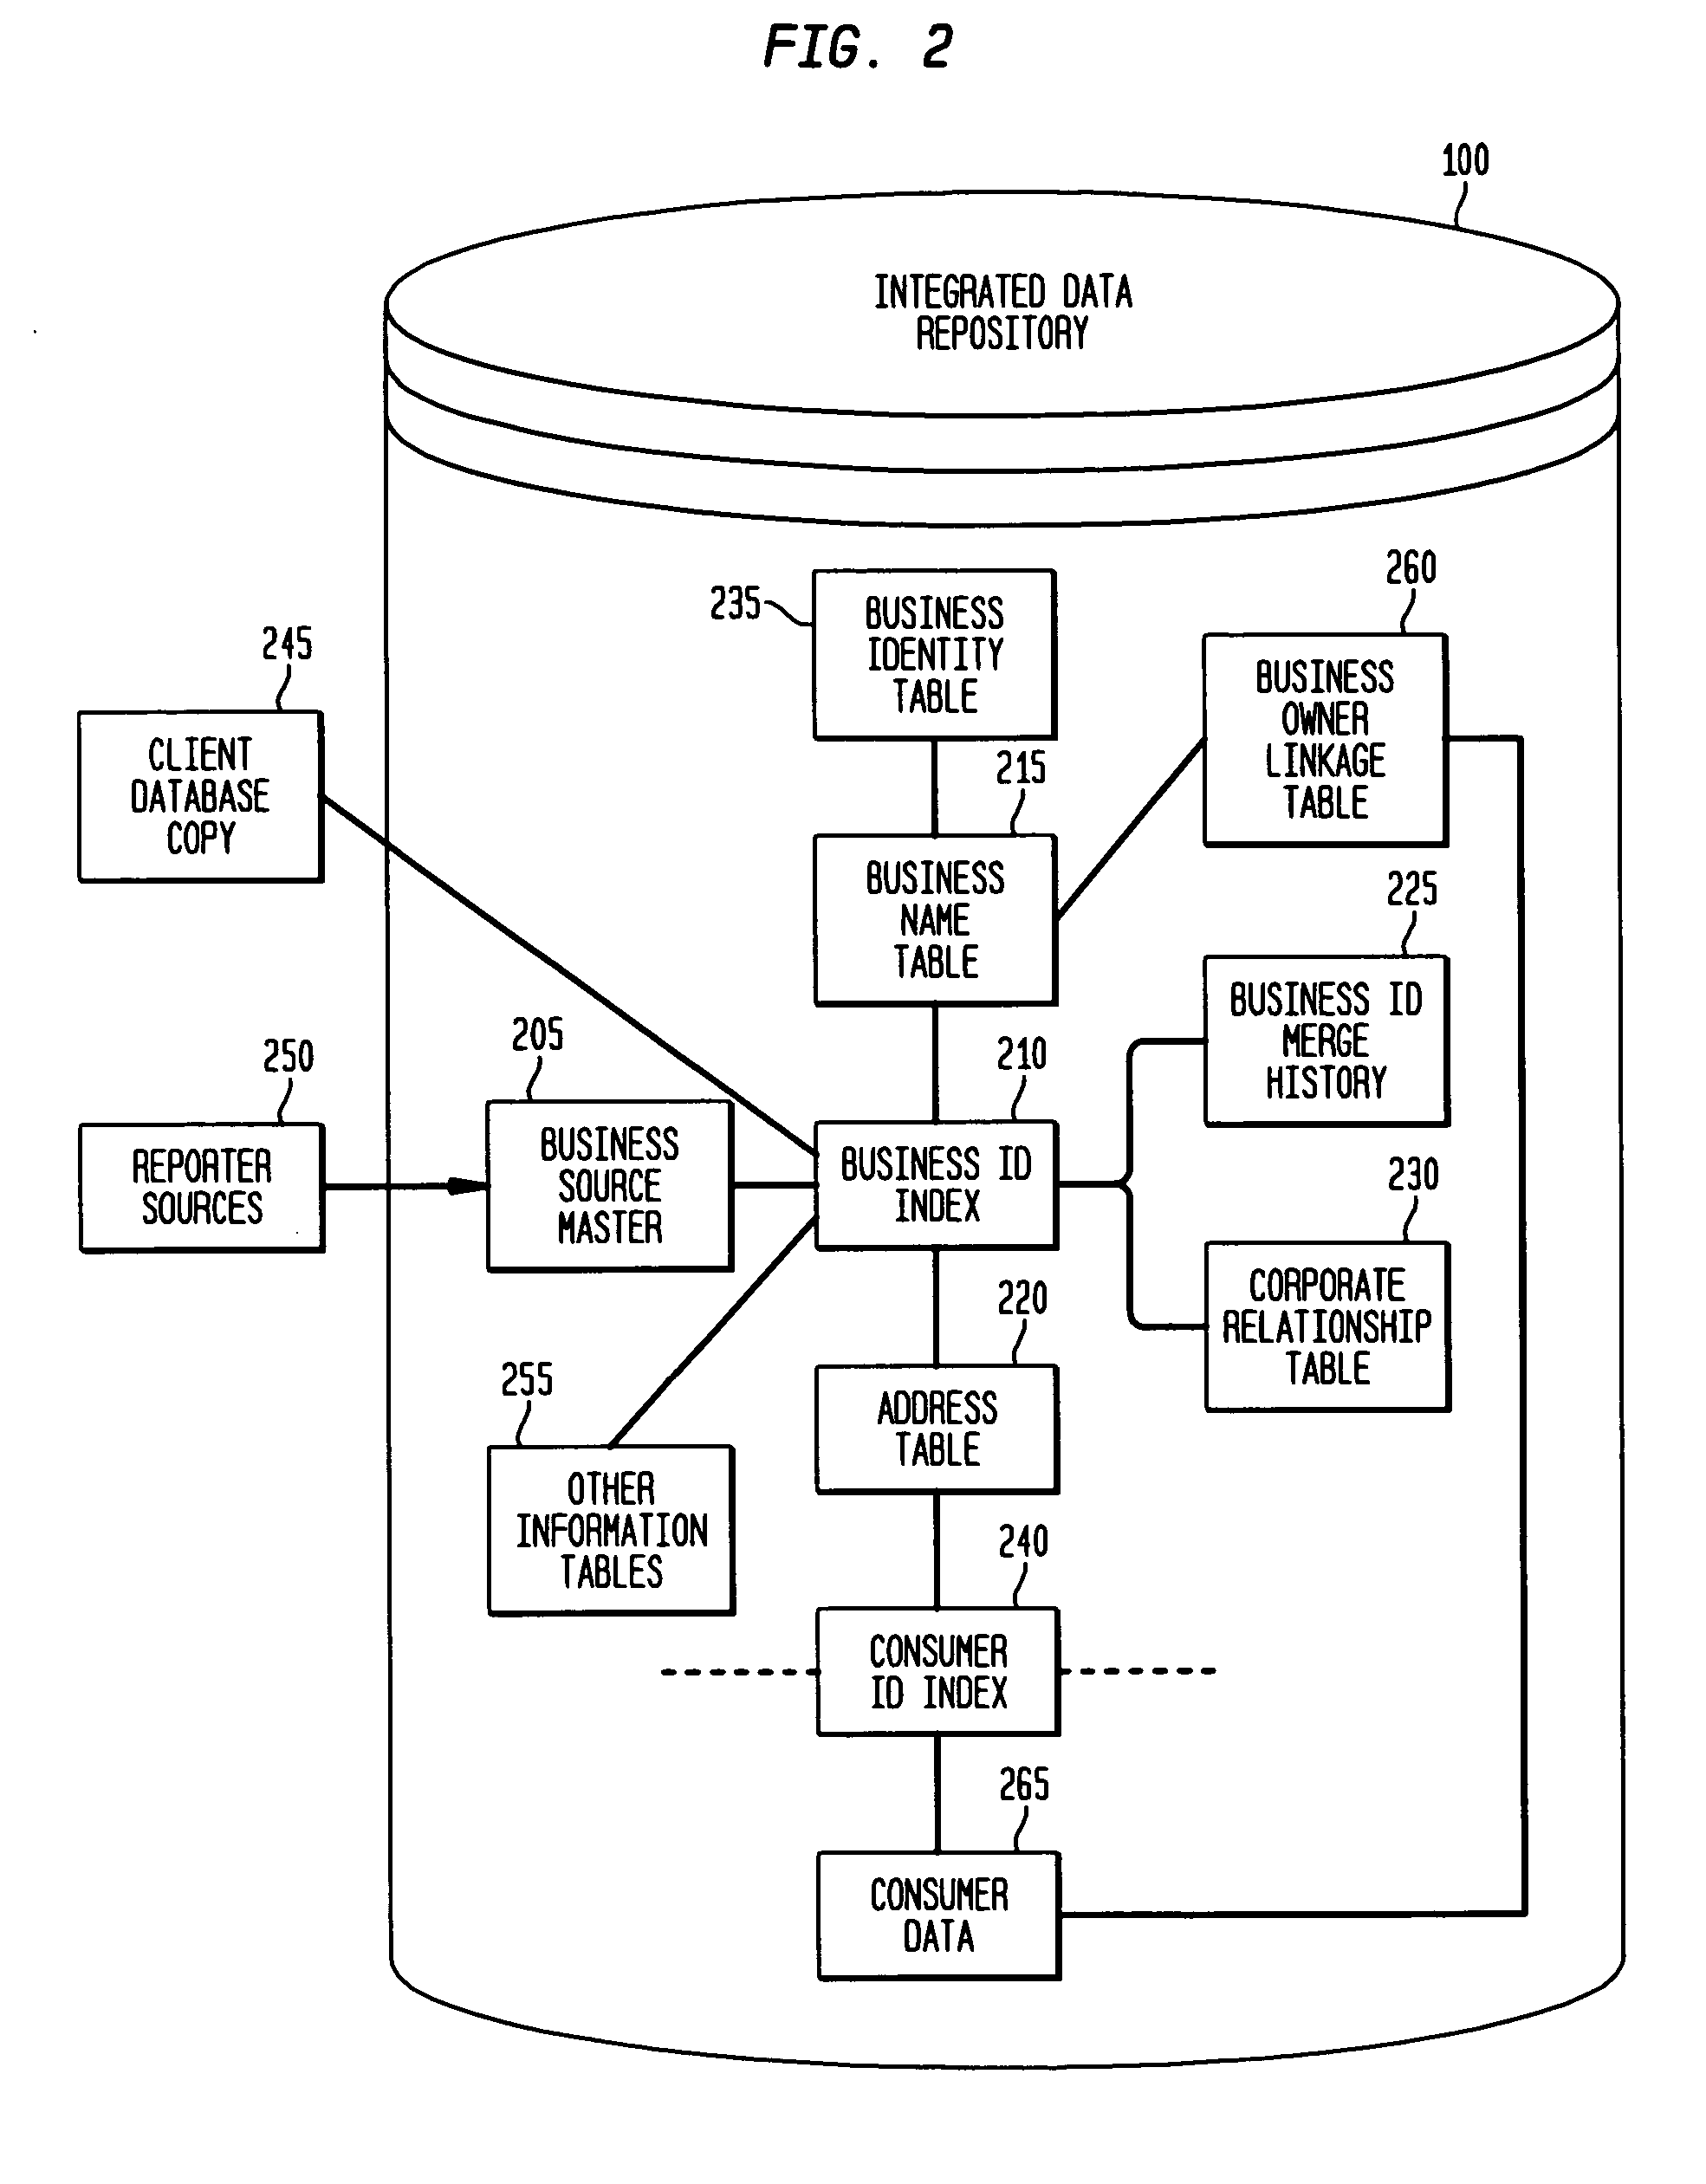 System, method and software for providing persistent entity identification and linking entity information in an integrated data repository